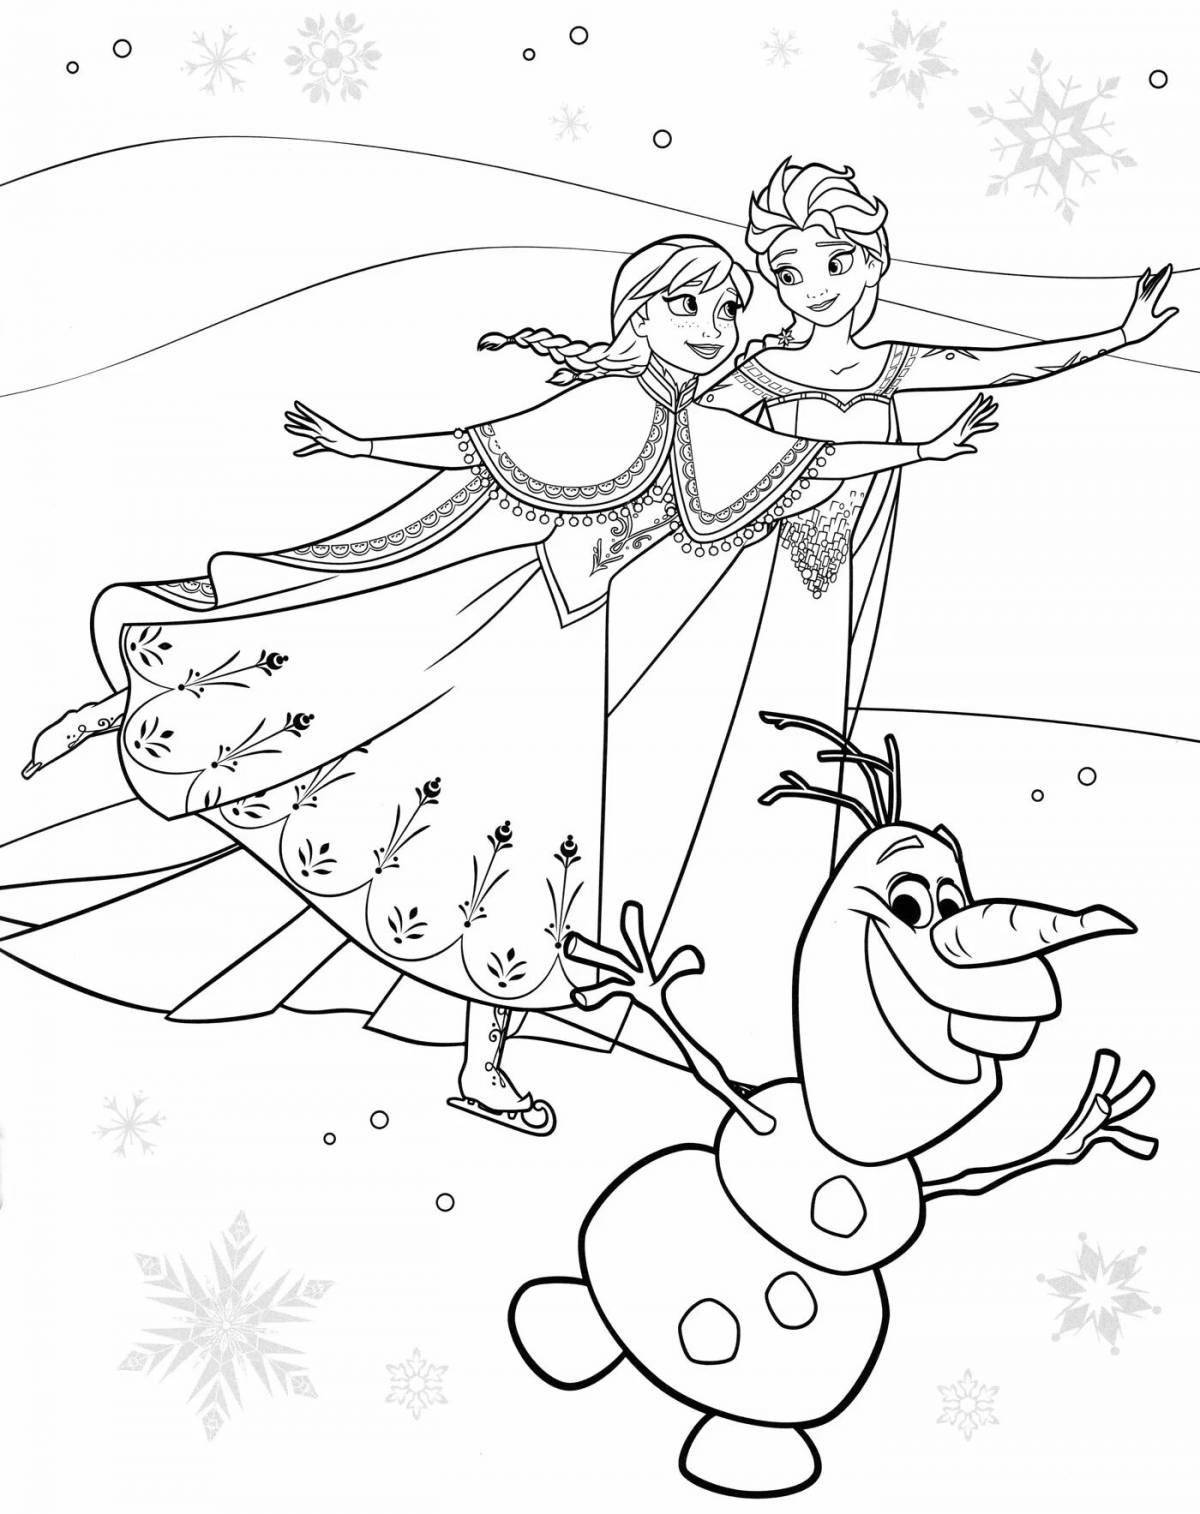 Quirky anna and olaf coloring book